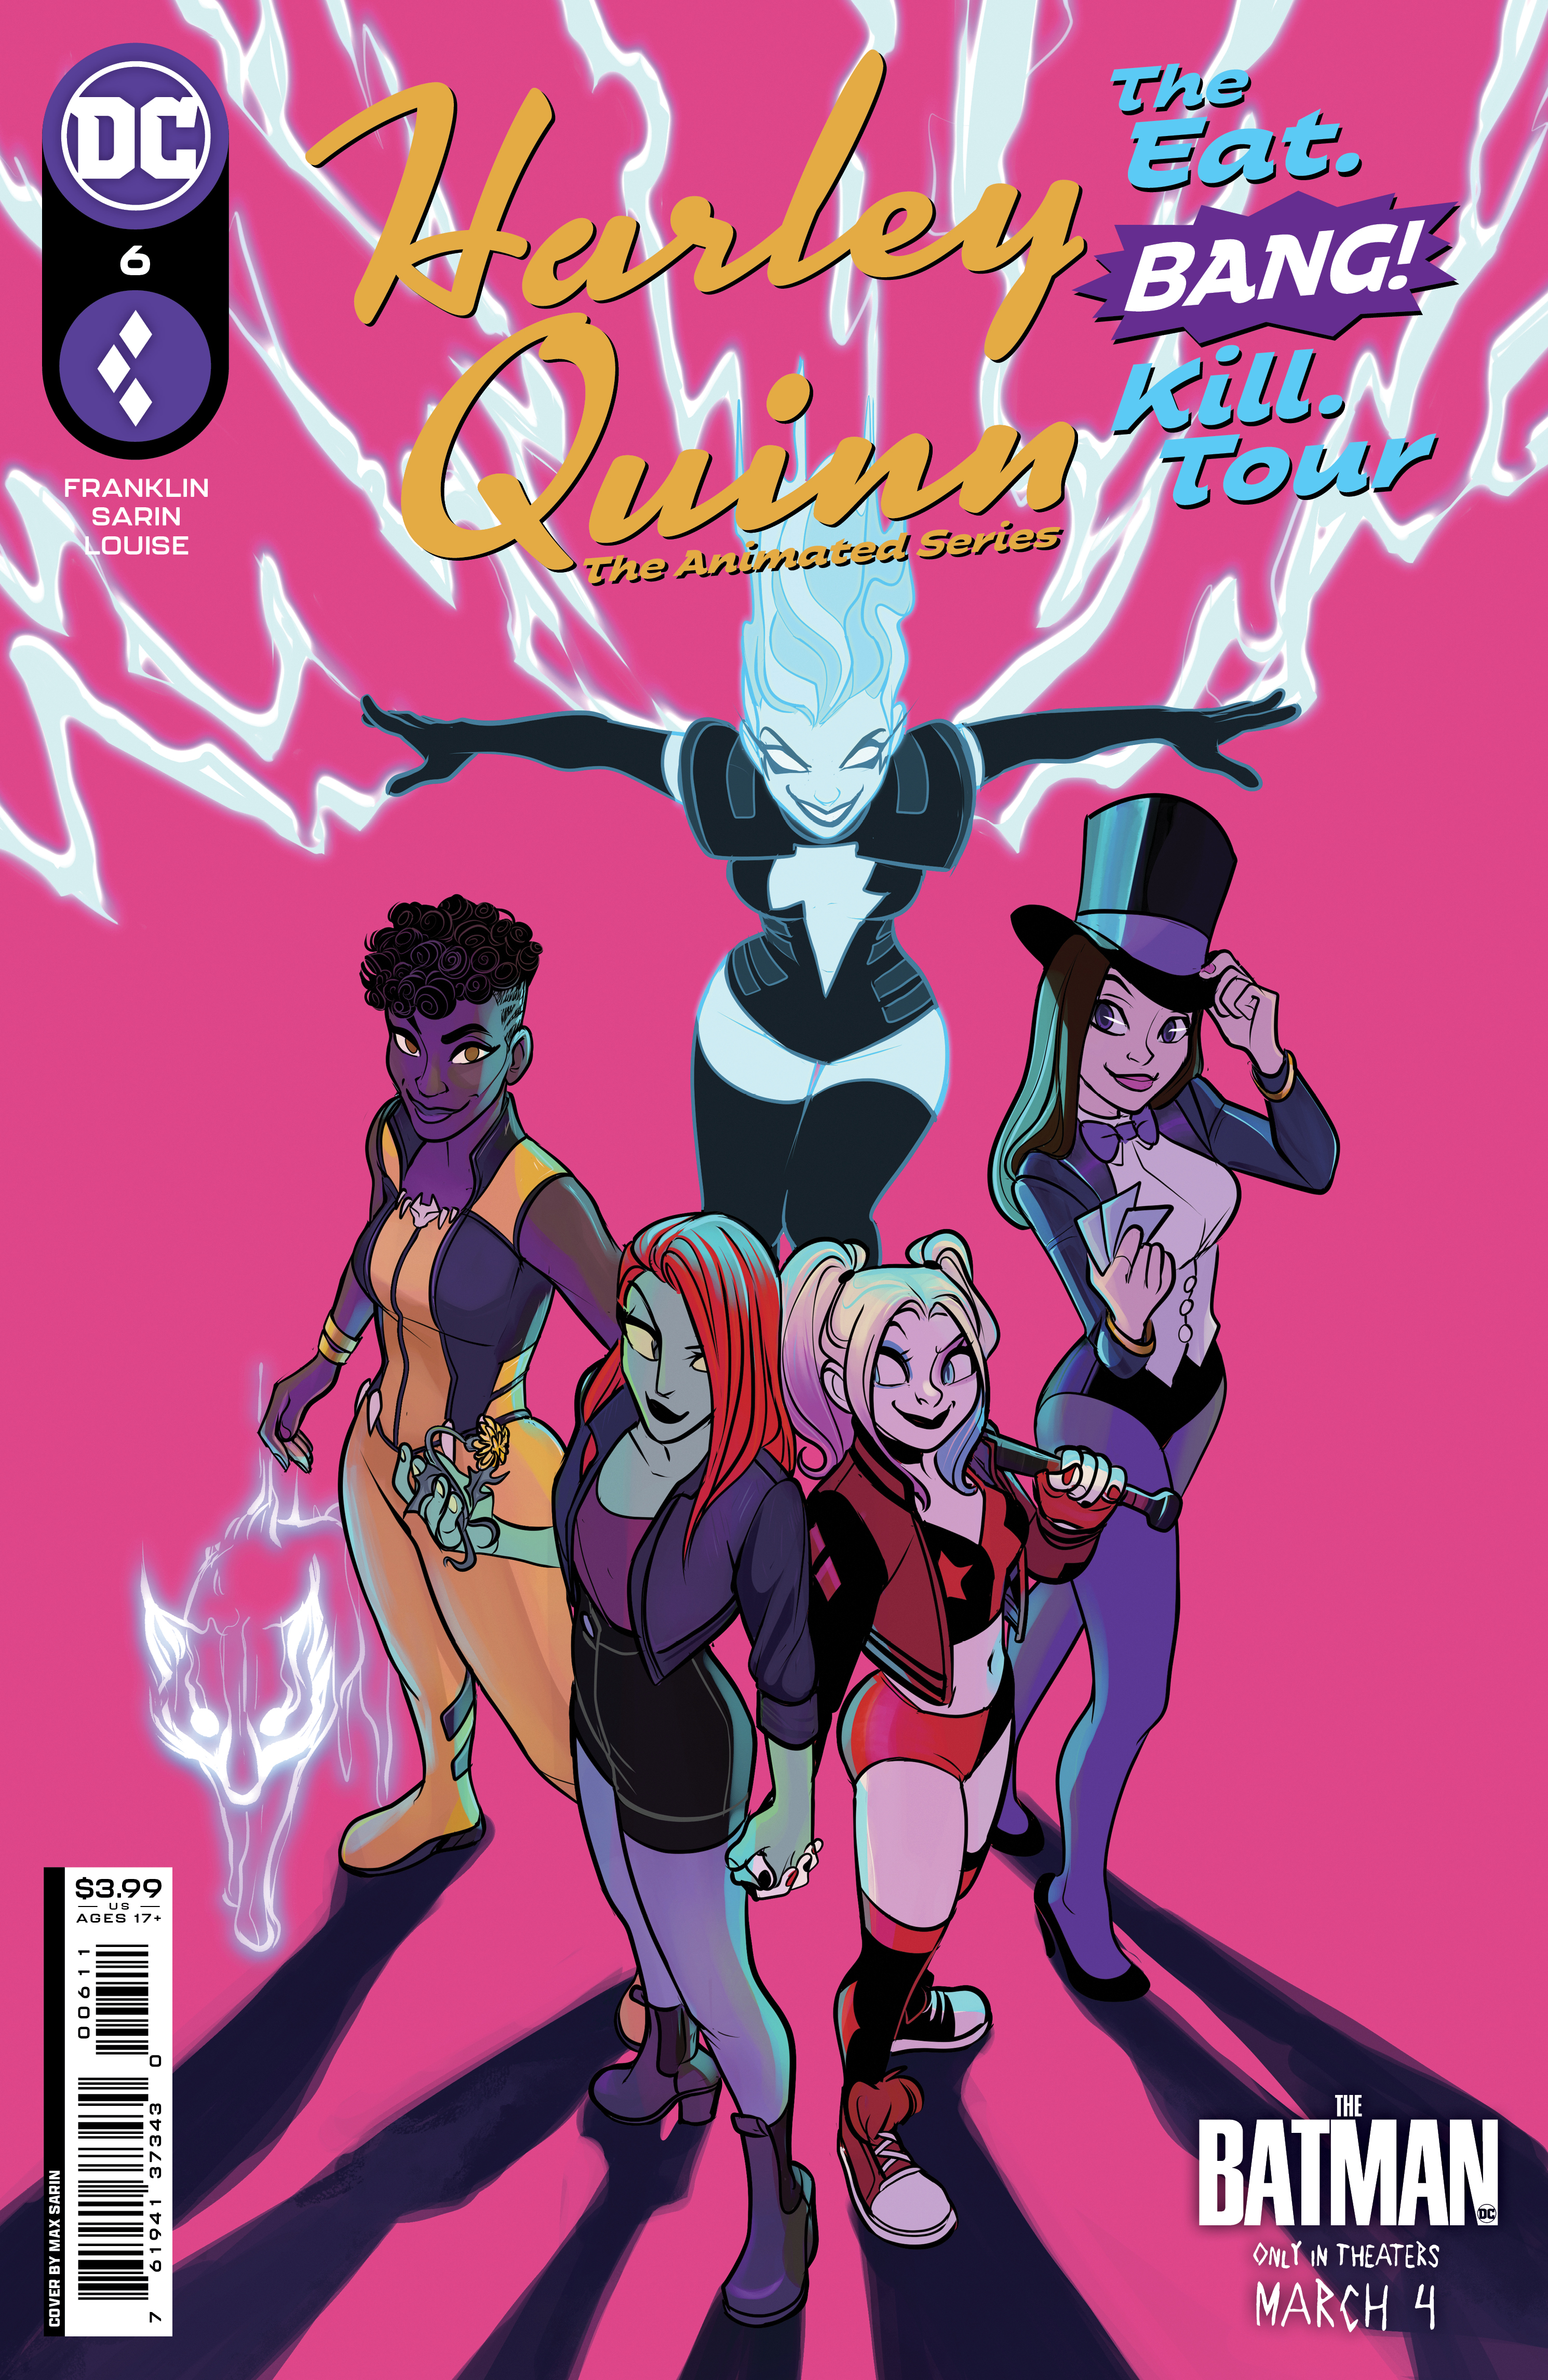 Harley Quinn The Animated Series The Eat Bang Kill Tour #6 Cover A Max Sarin (Mature) (Of 6)